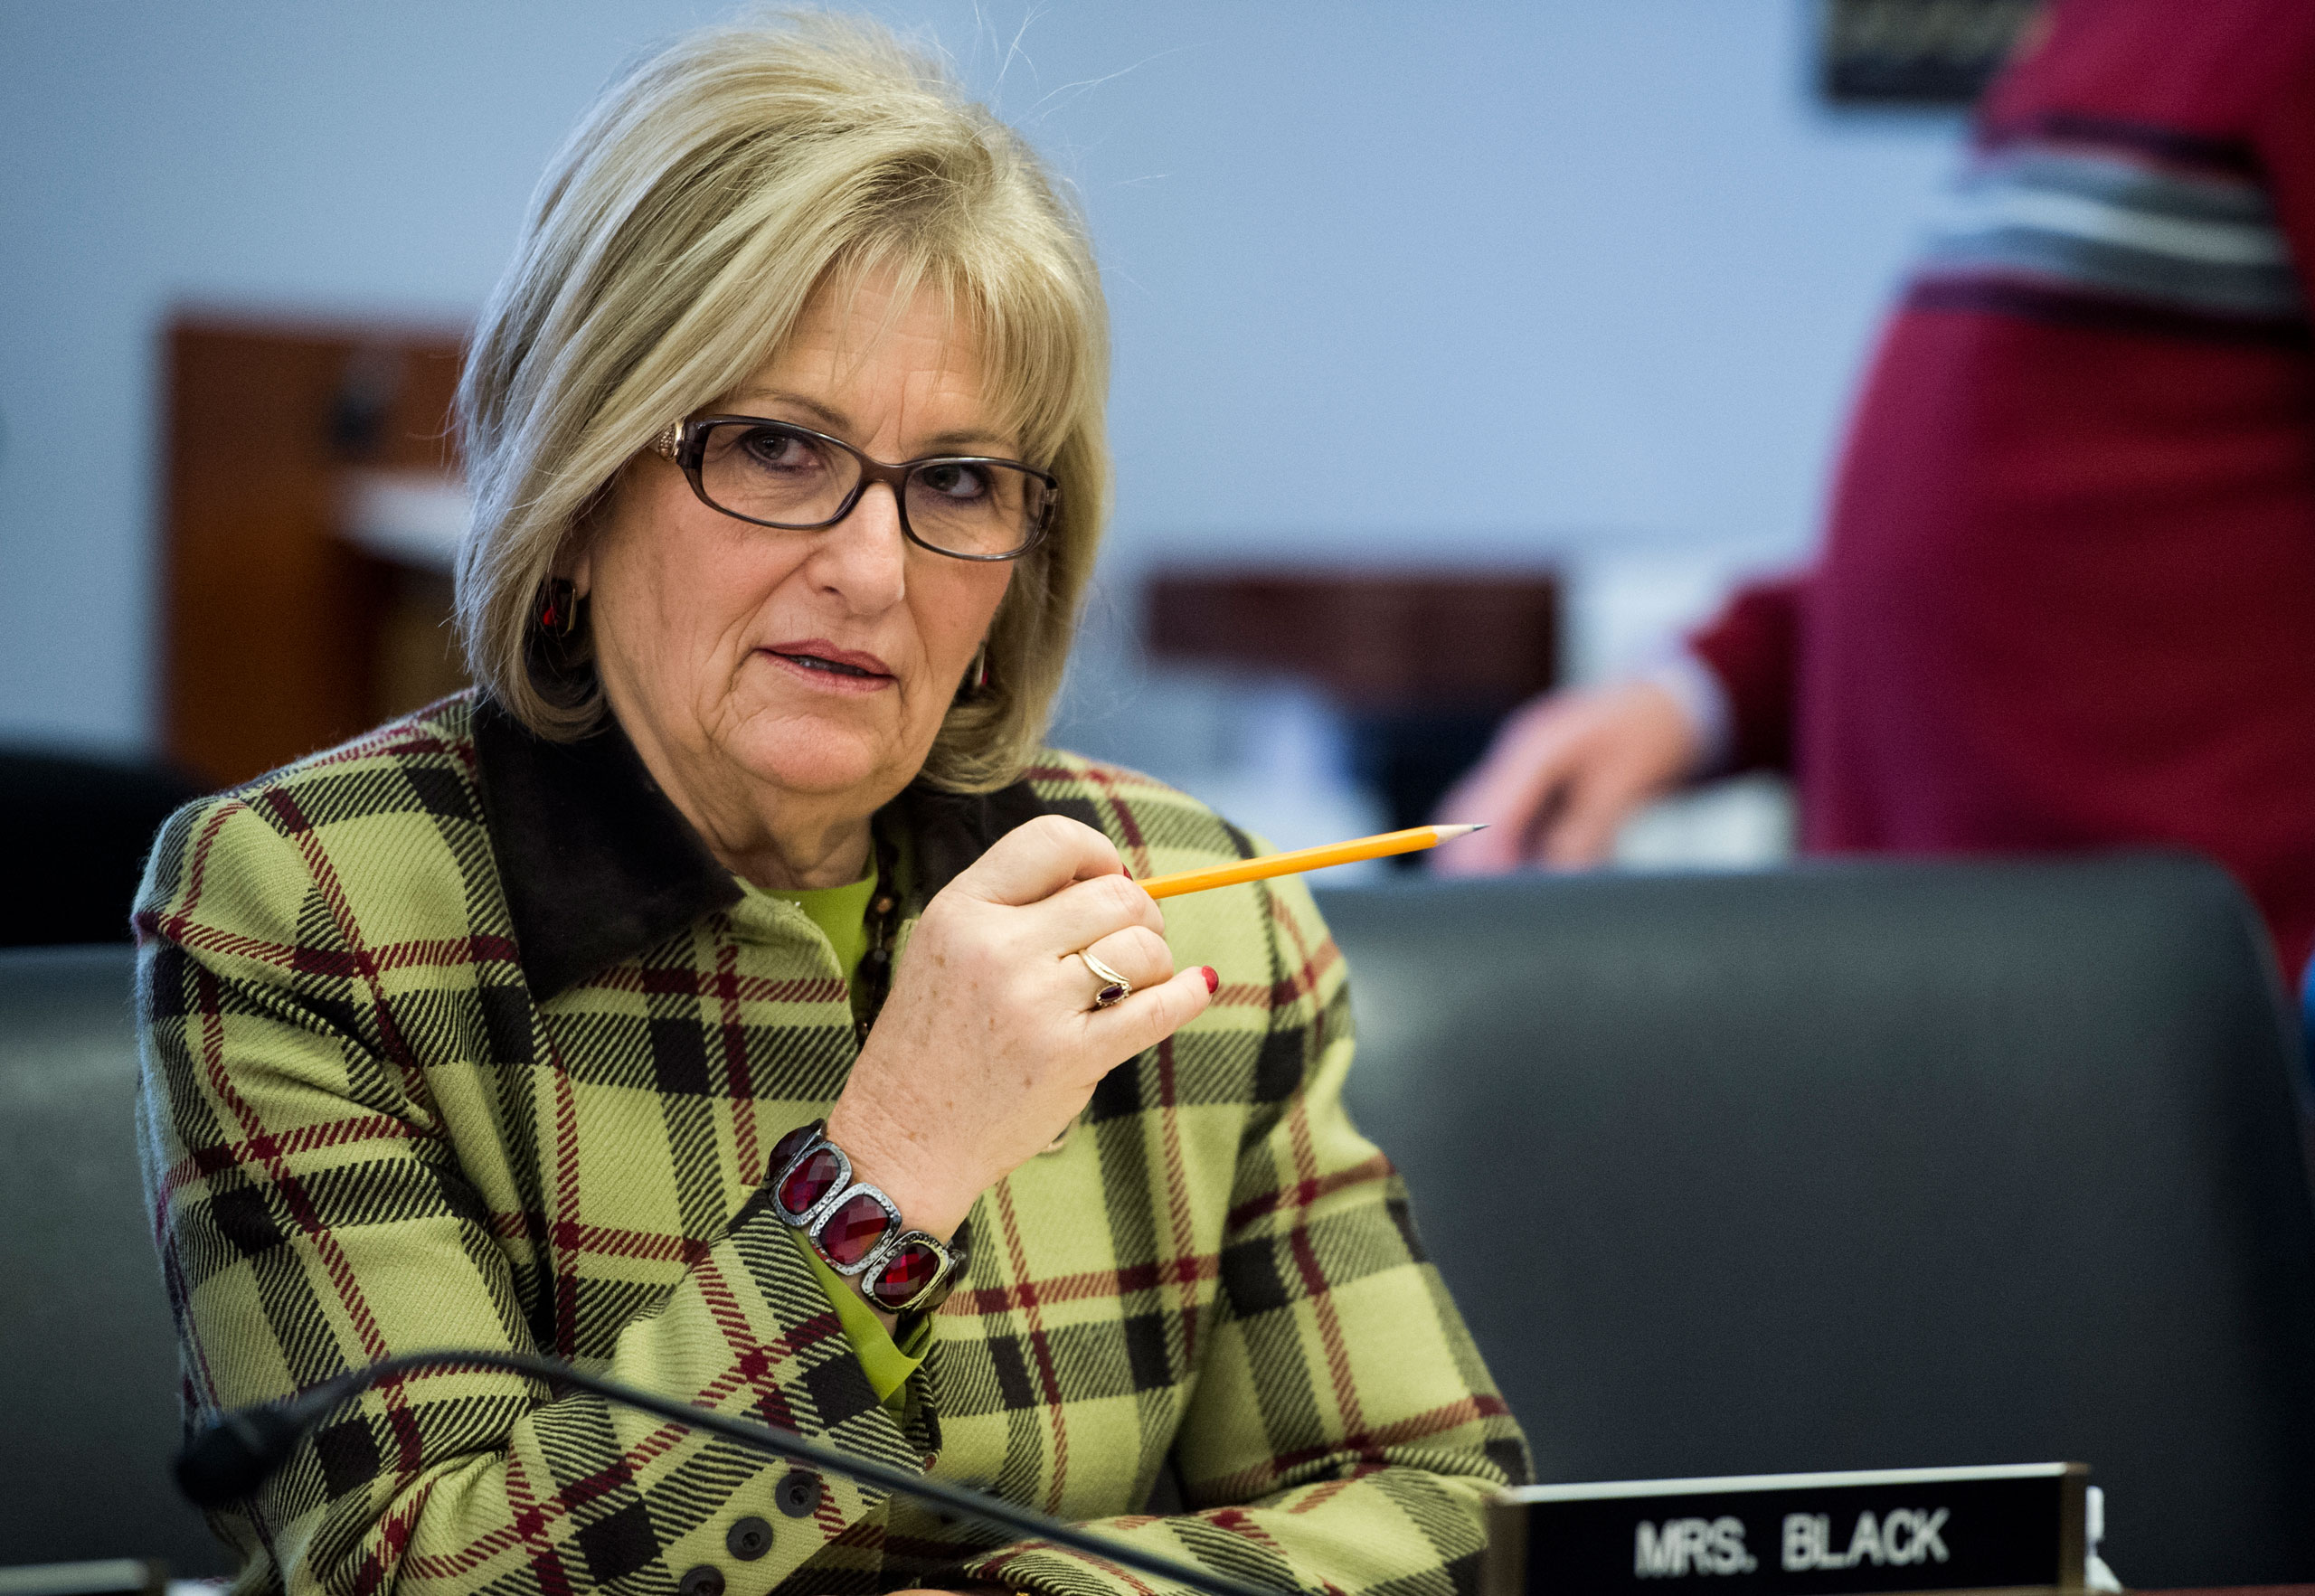 Rep. Diane Black takes her seat for the House Budget Committee hearing on "The Congressional Budget Office's (CBO) Budget and Economic Outlook" on  Jan. 27, 2015. (Bill Clark—CQ Roll Call/AP)